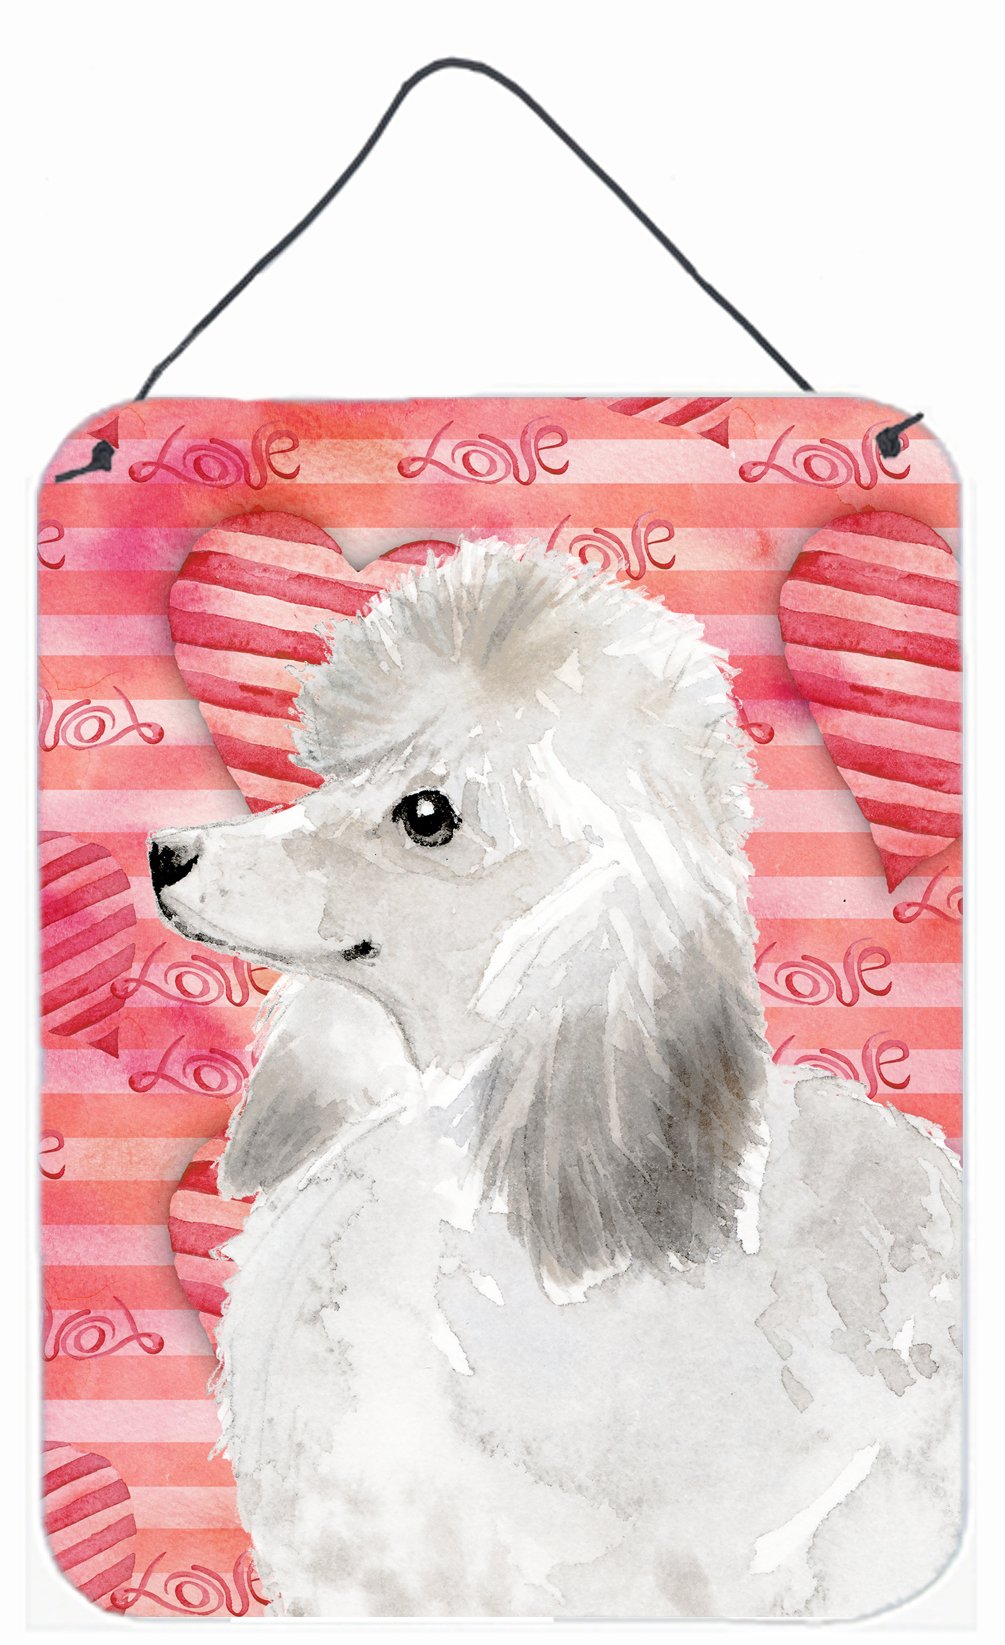 White Standard Poodle Love Wall or Door Hanging Prints BB9491DS1216 by Caroline's Treasures